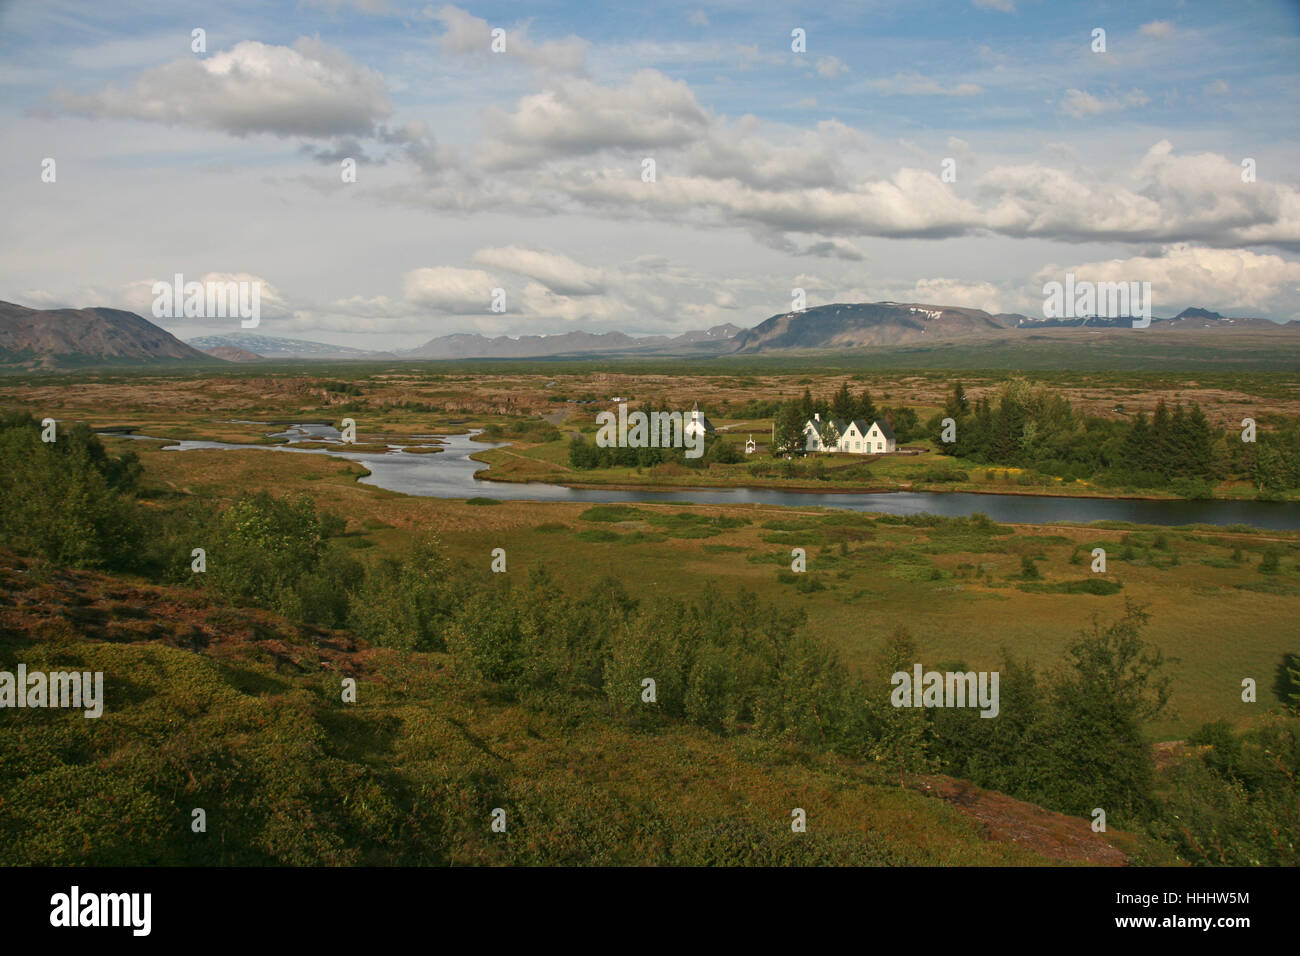 church, birches, valley, course of a river, mountain, river, water, blue, Stock Photo